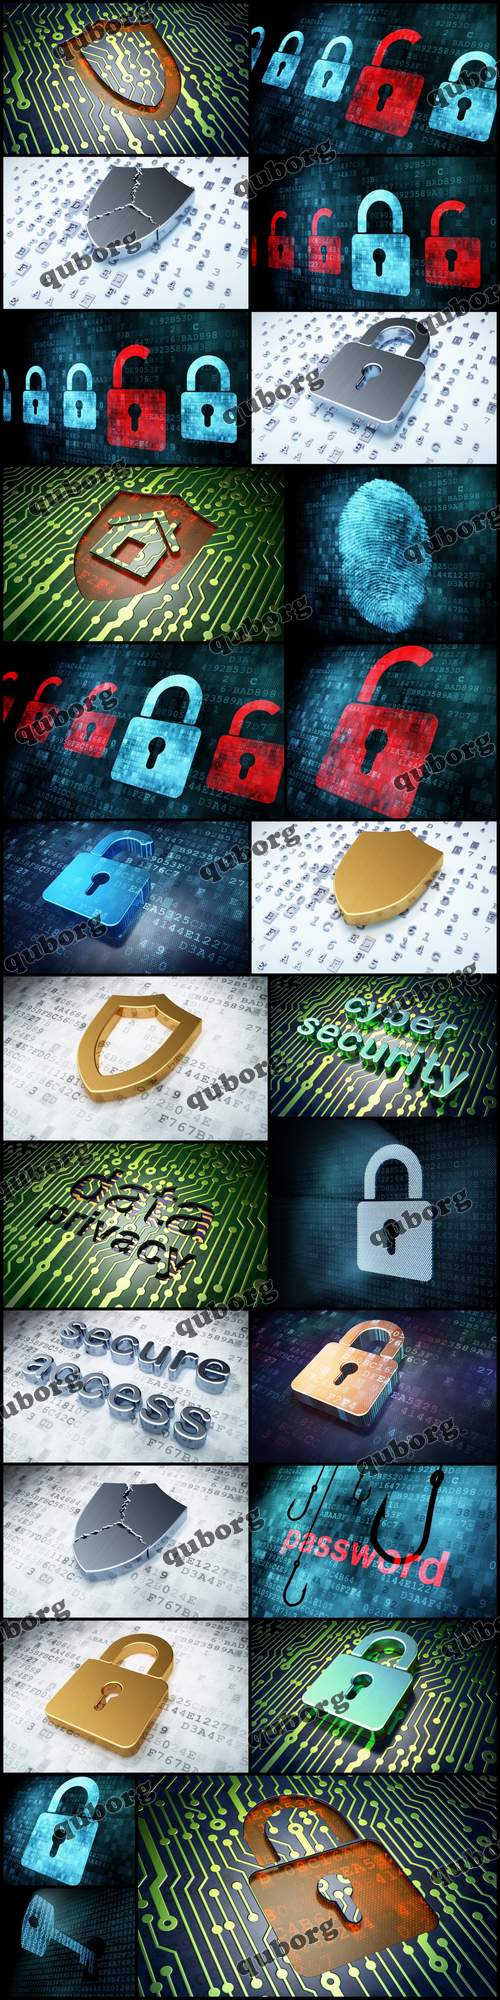 Stock Photos - Different Security Concepts